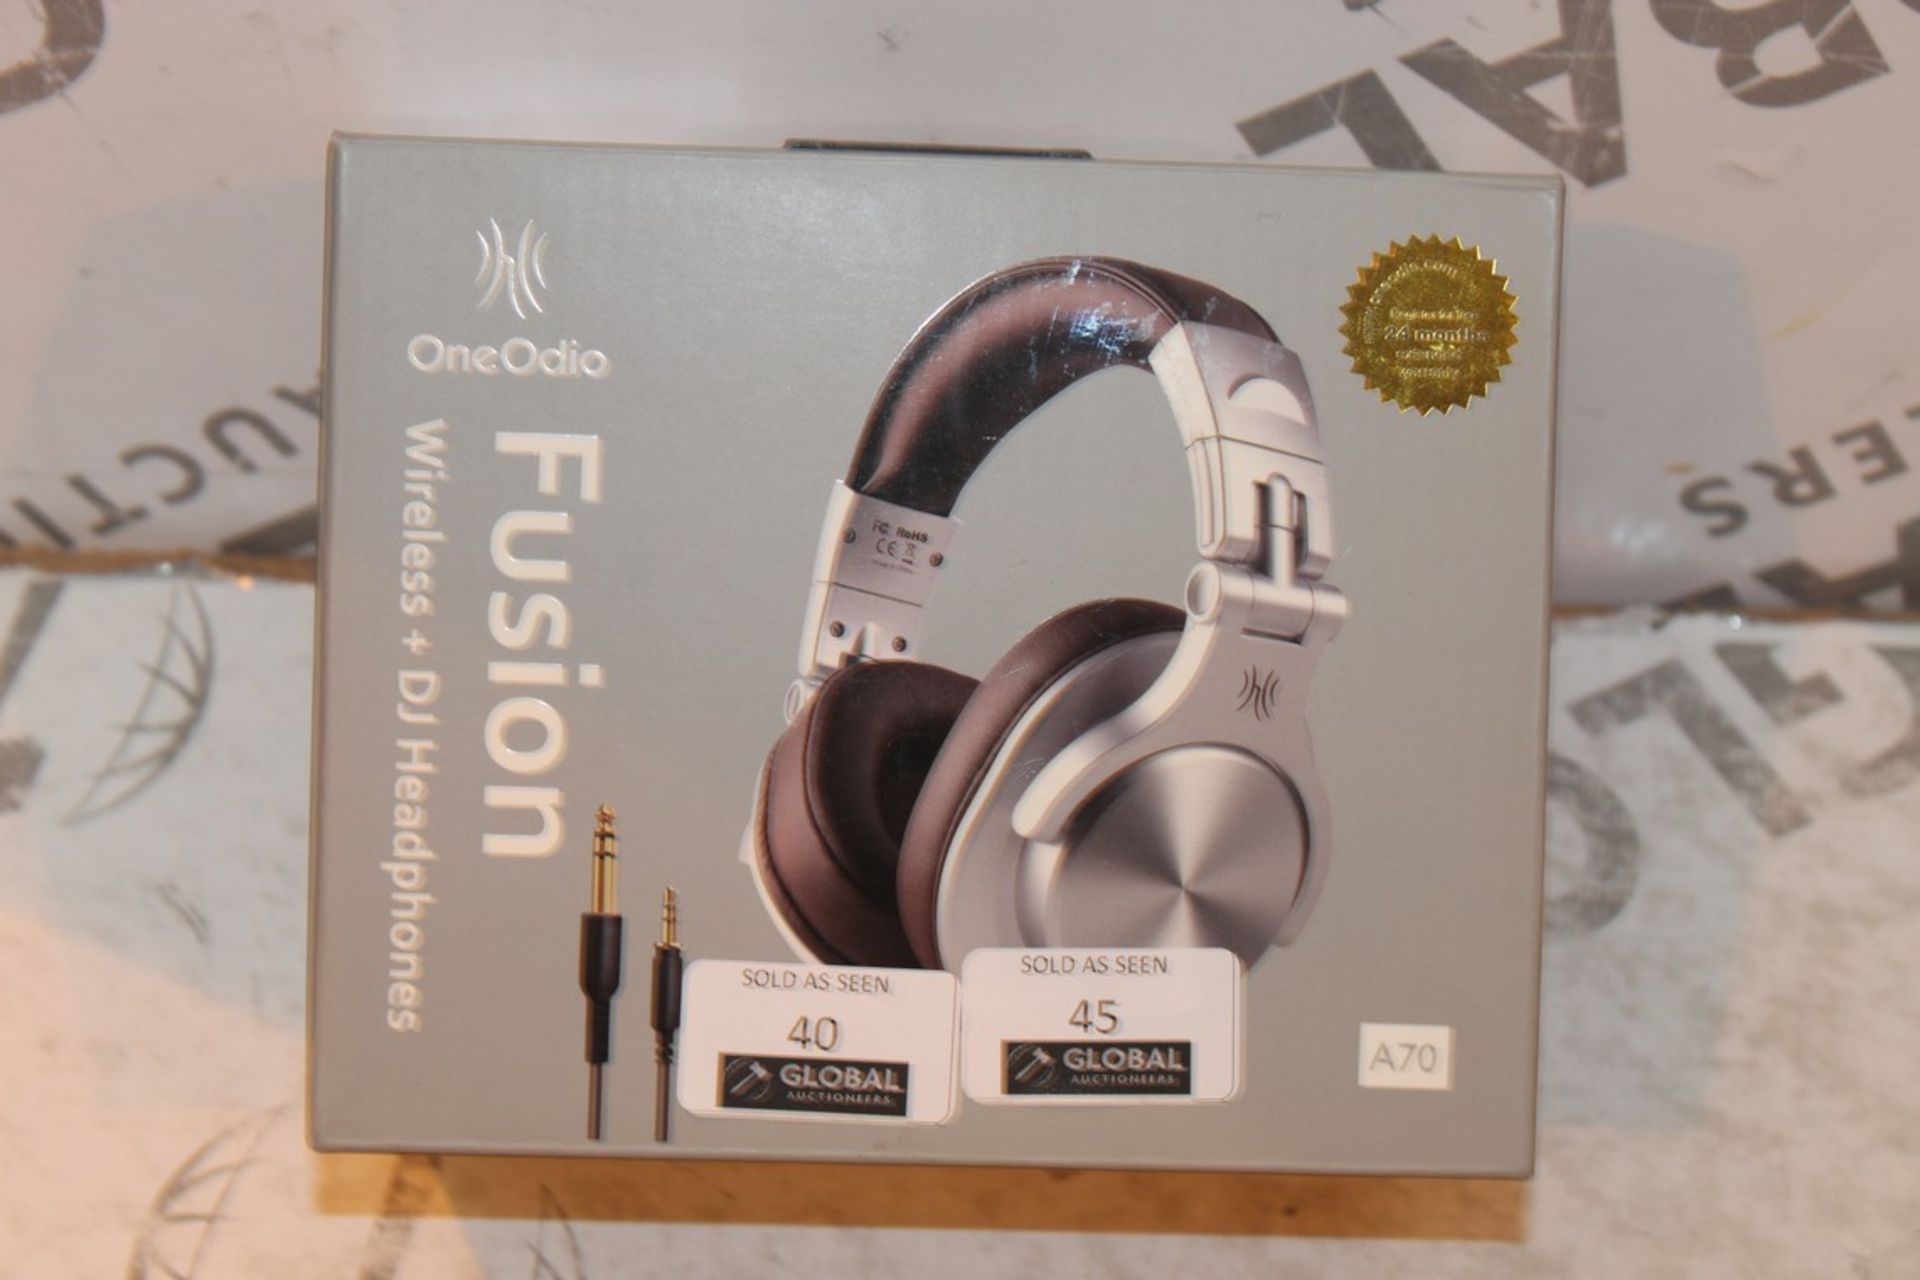 Boxed Brand New Pair One Odio A70 Fusion Wireless & DJ Headphones (Silver) RRP £50 (Appraisals